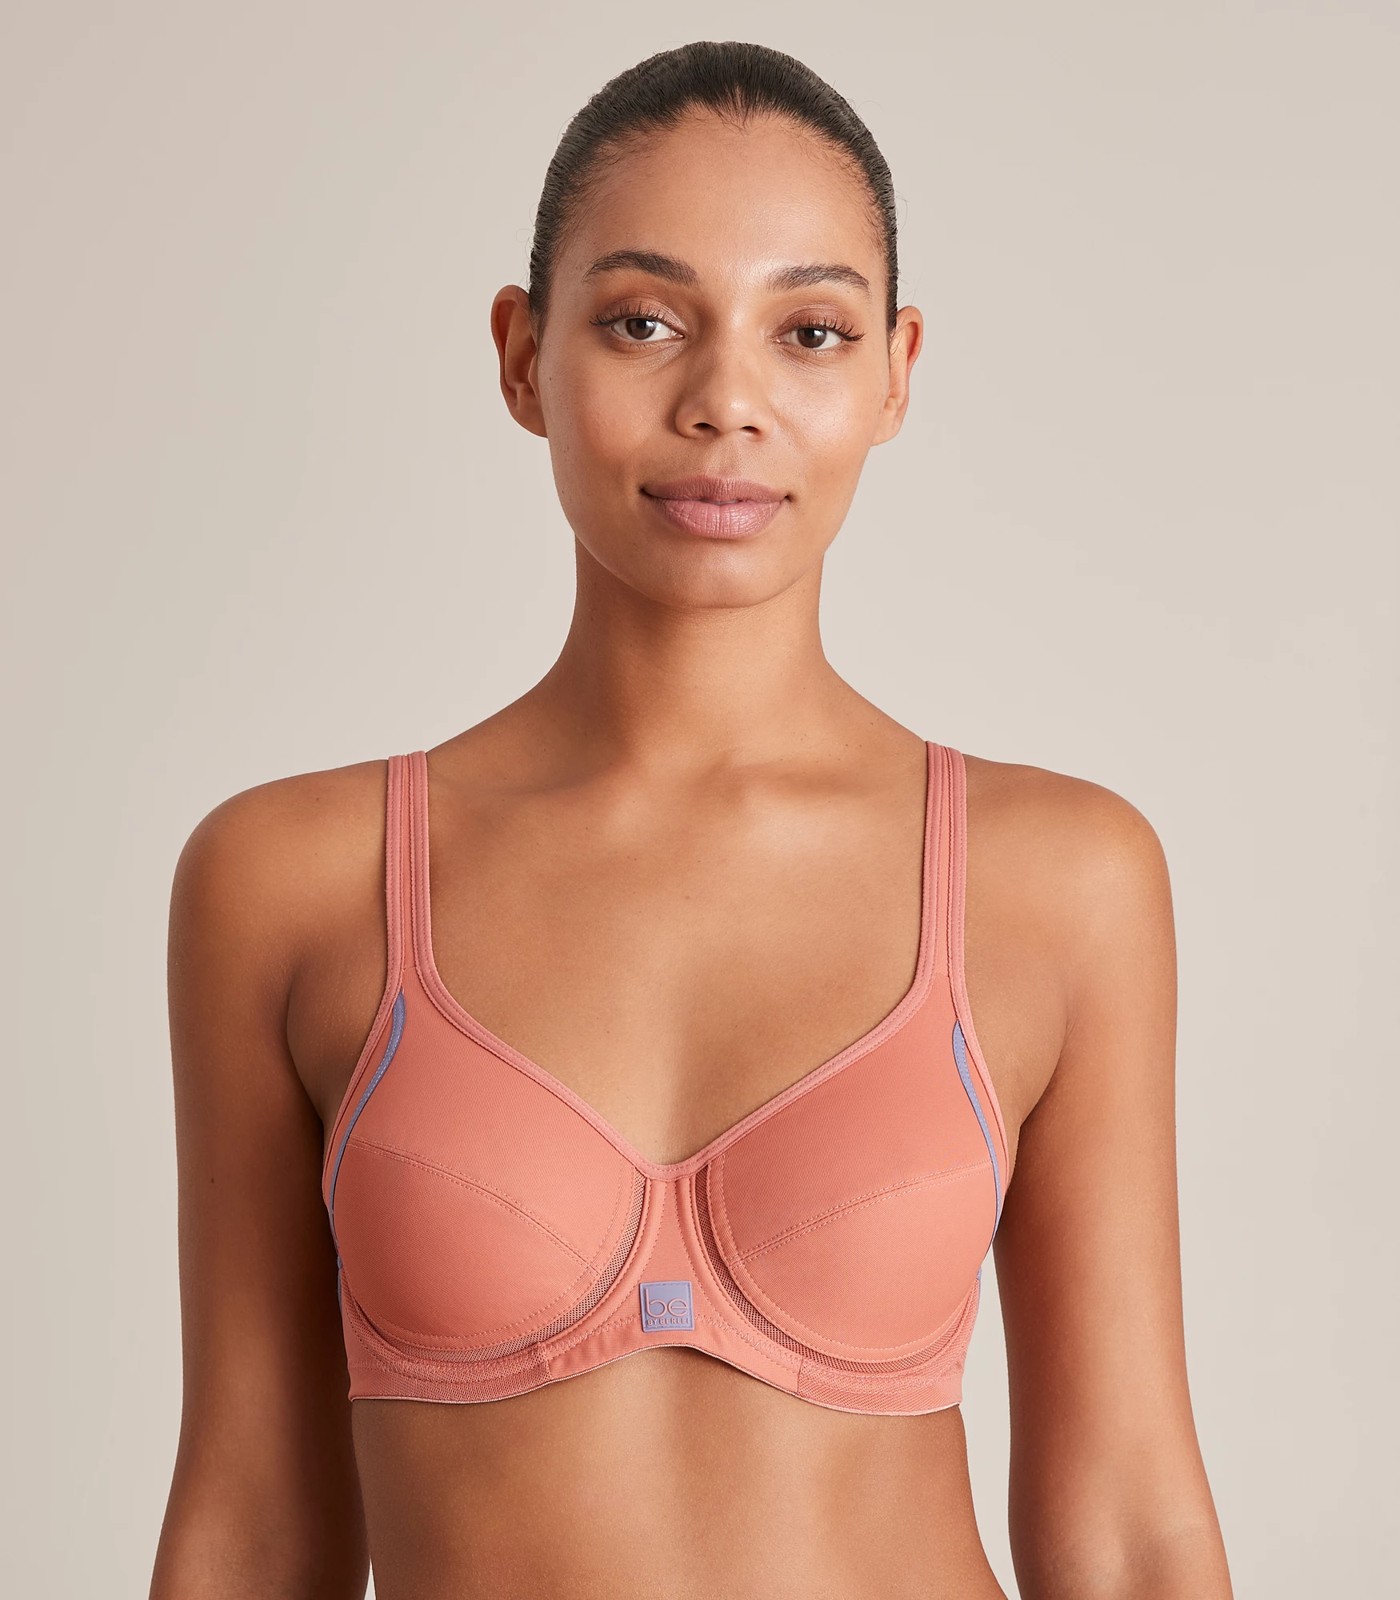 WOMENS: Underwire Firm Support Contour High-Impact Sports Bra